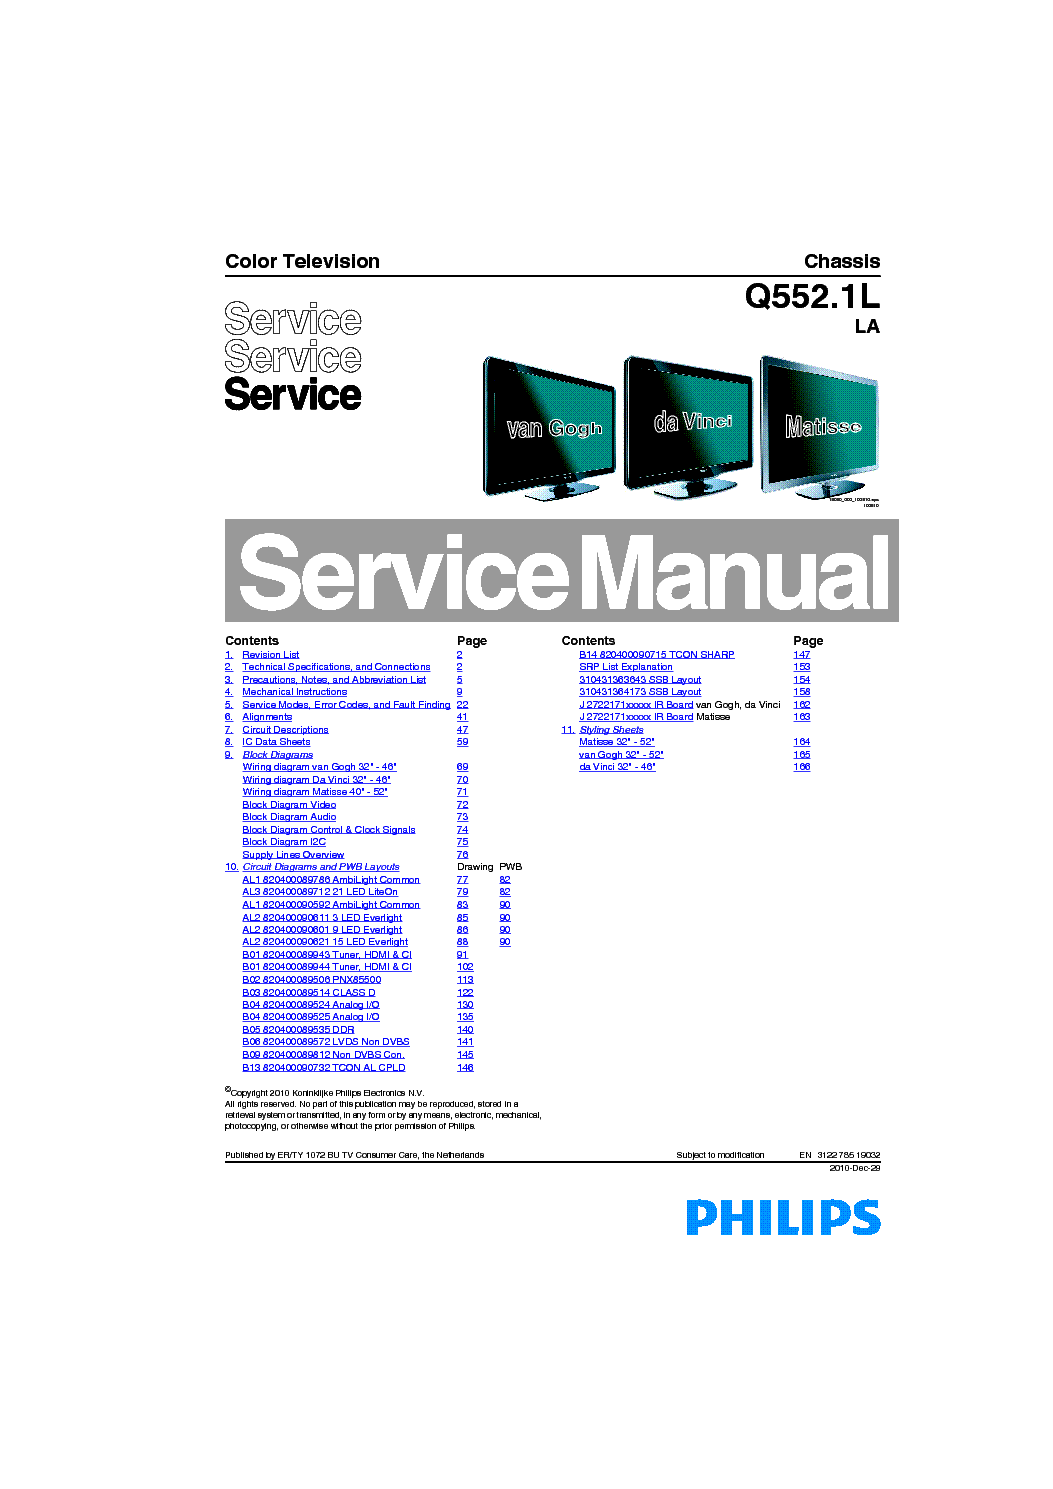 PHILIPS Q552.1L LA CHASSIS LCD TV SM service manual (1st page)